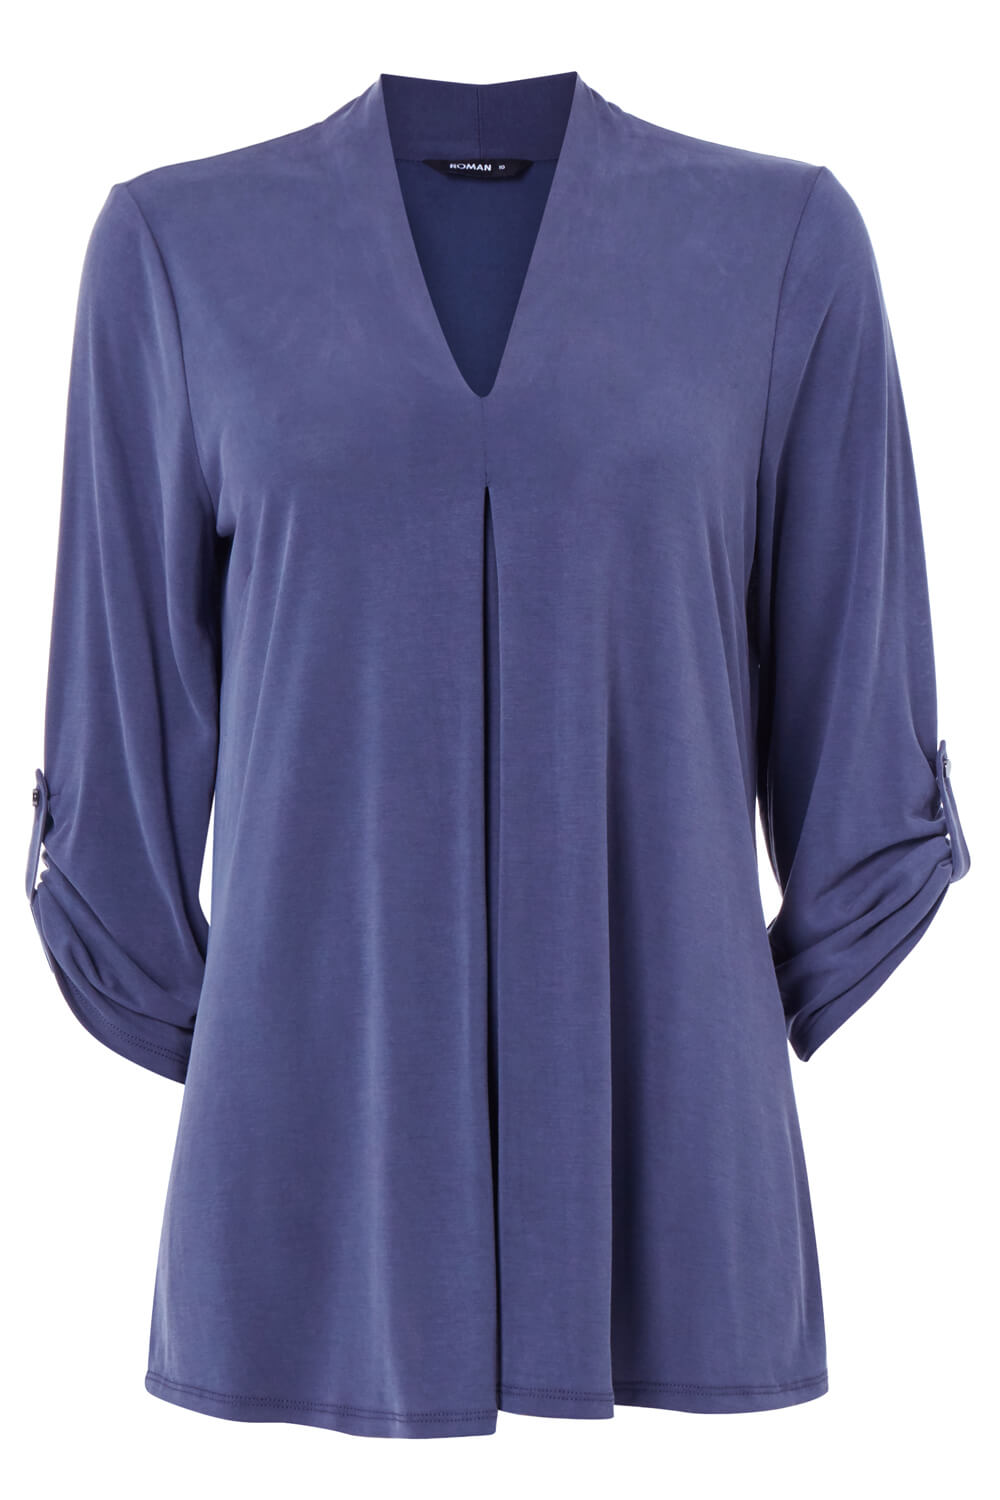 Navy  V-Neck Pleat Front Top, Image 6 of 6